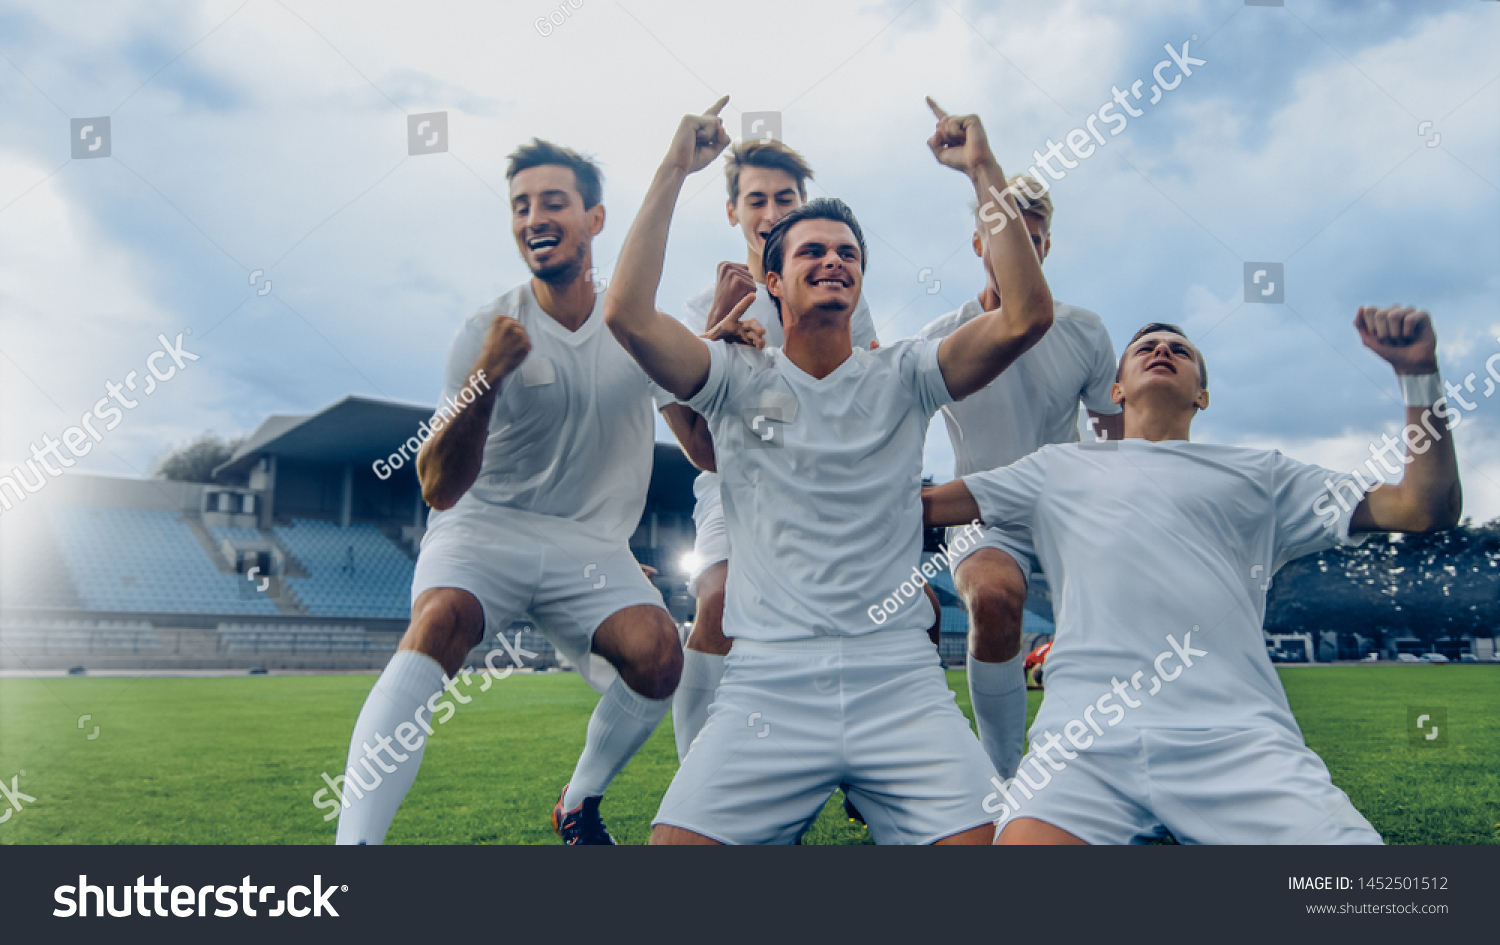 Captain of the Soccer Team Stands on His Knees Celebrates Awesome Victory, Makes YES Gesture Champion Team Joins Him. Successful Happy Football Players Celebrate Victory. #1452501512